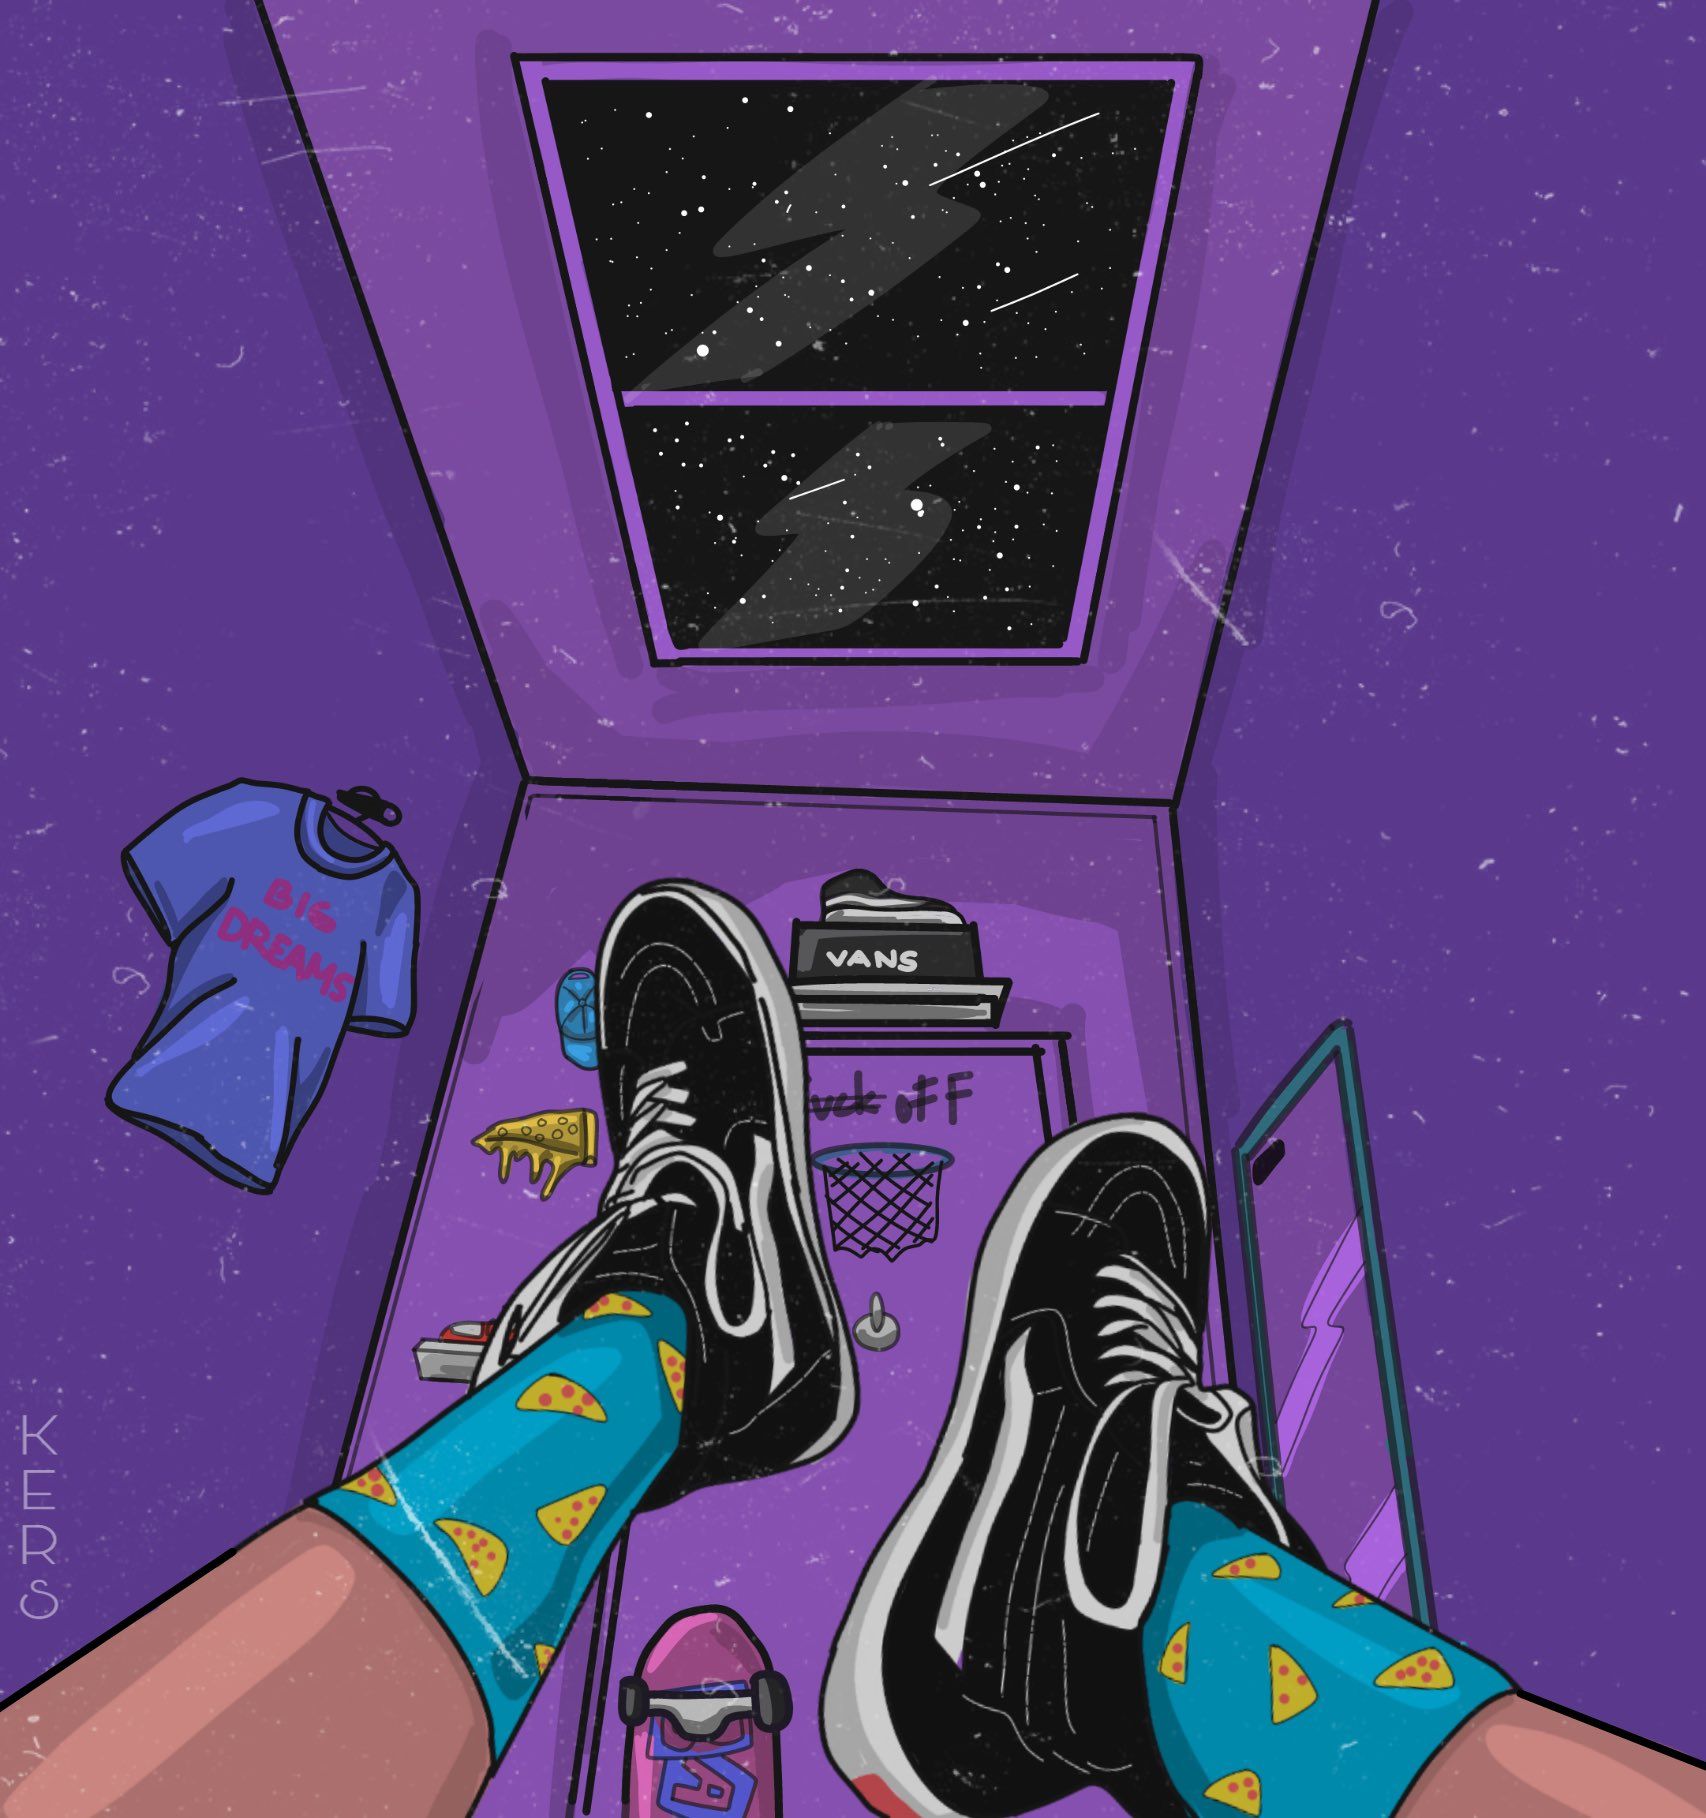 A digital illustration of a person's feet in pizza socks, sitting in a purple room with a galaxy visible through the window - Lo fi